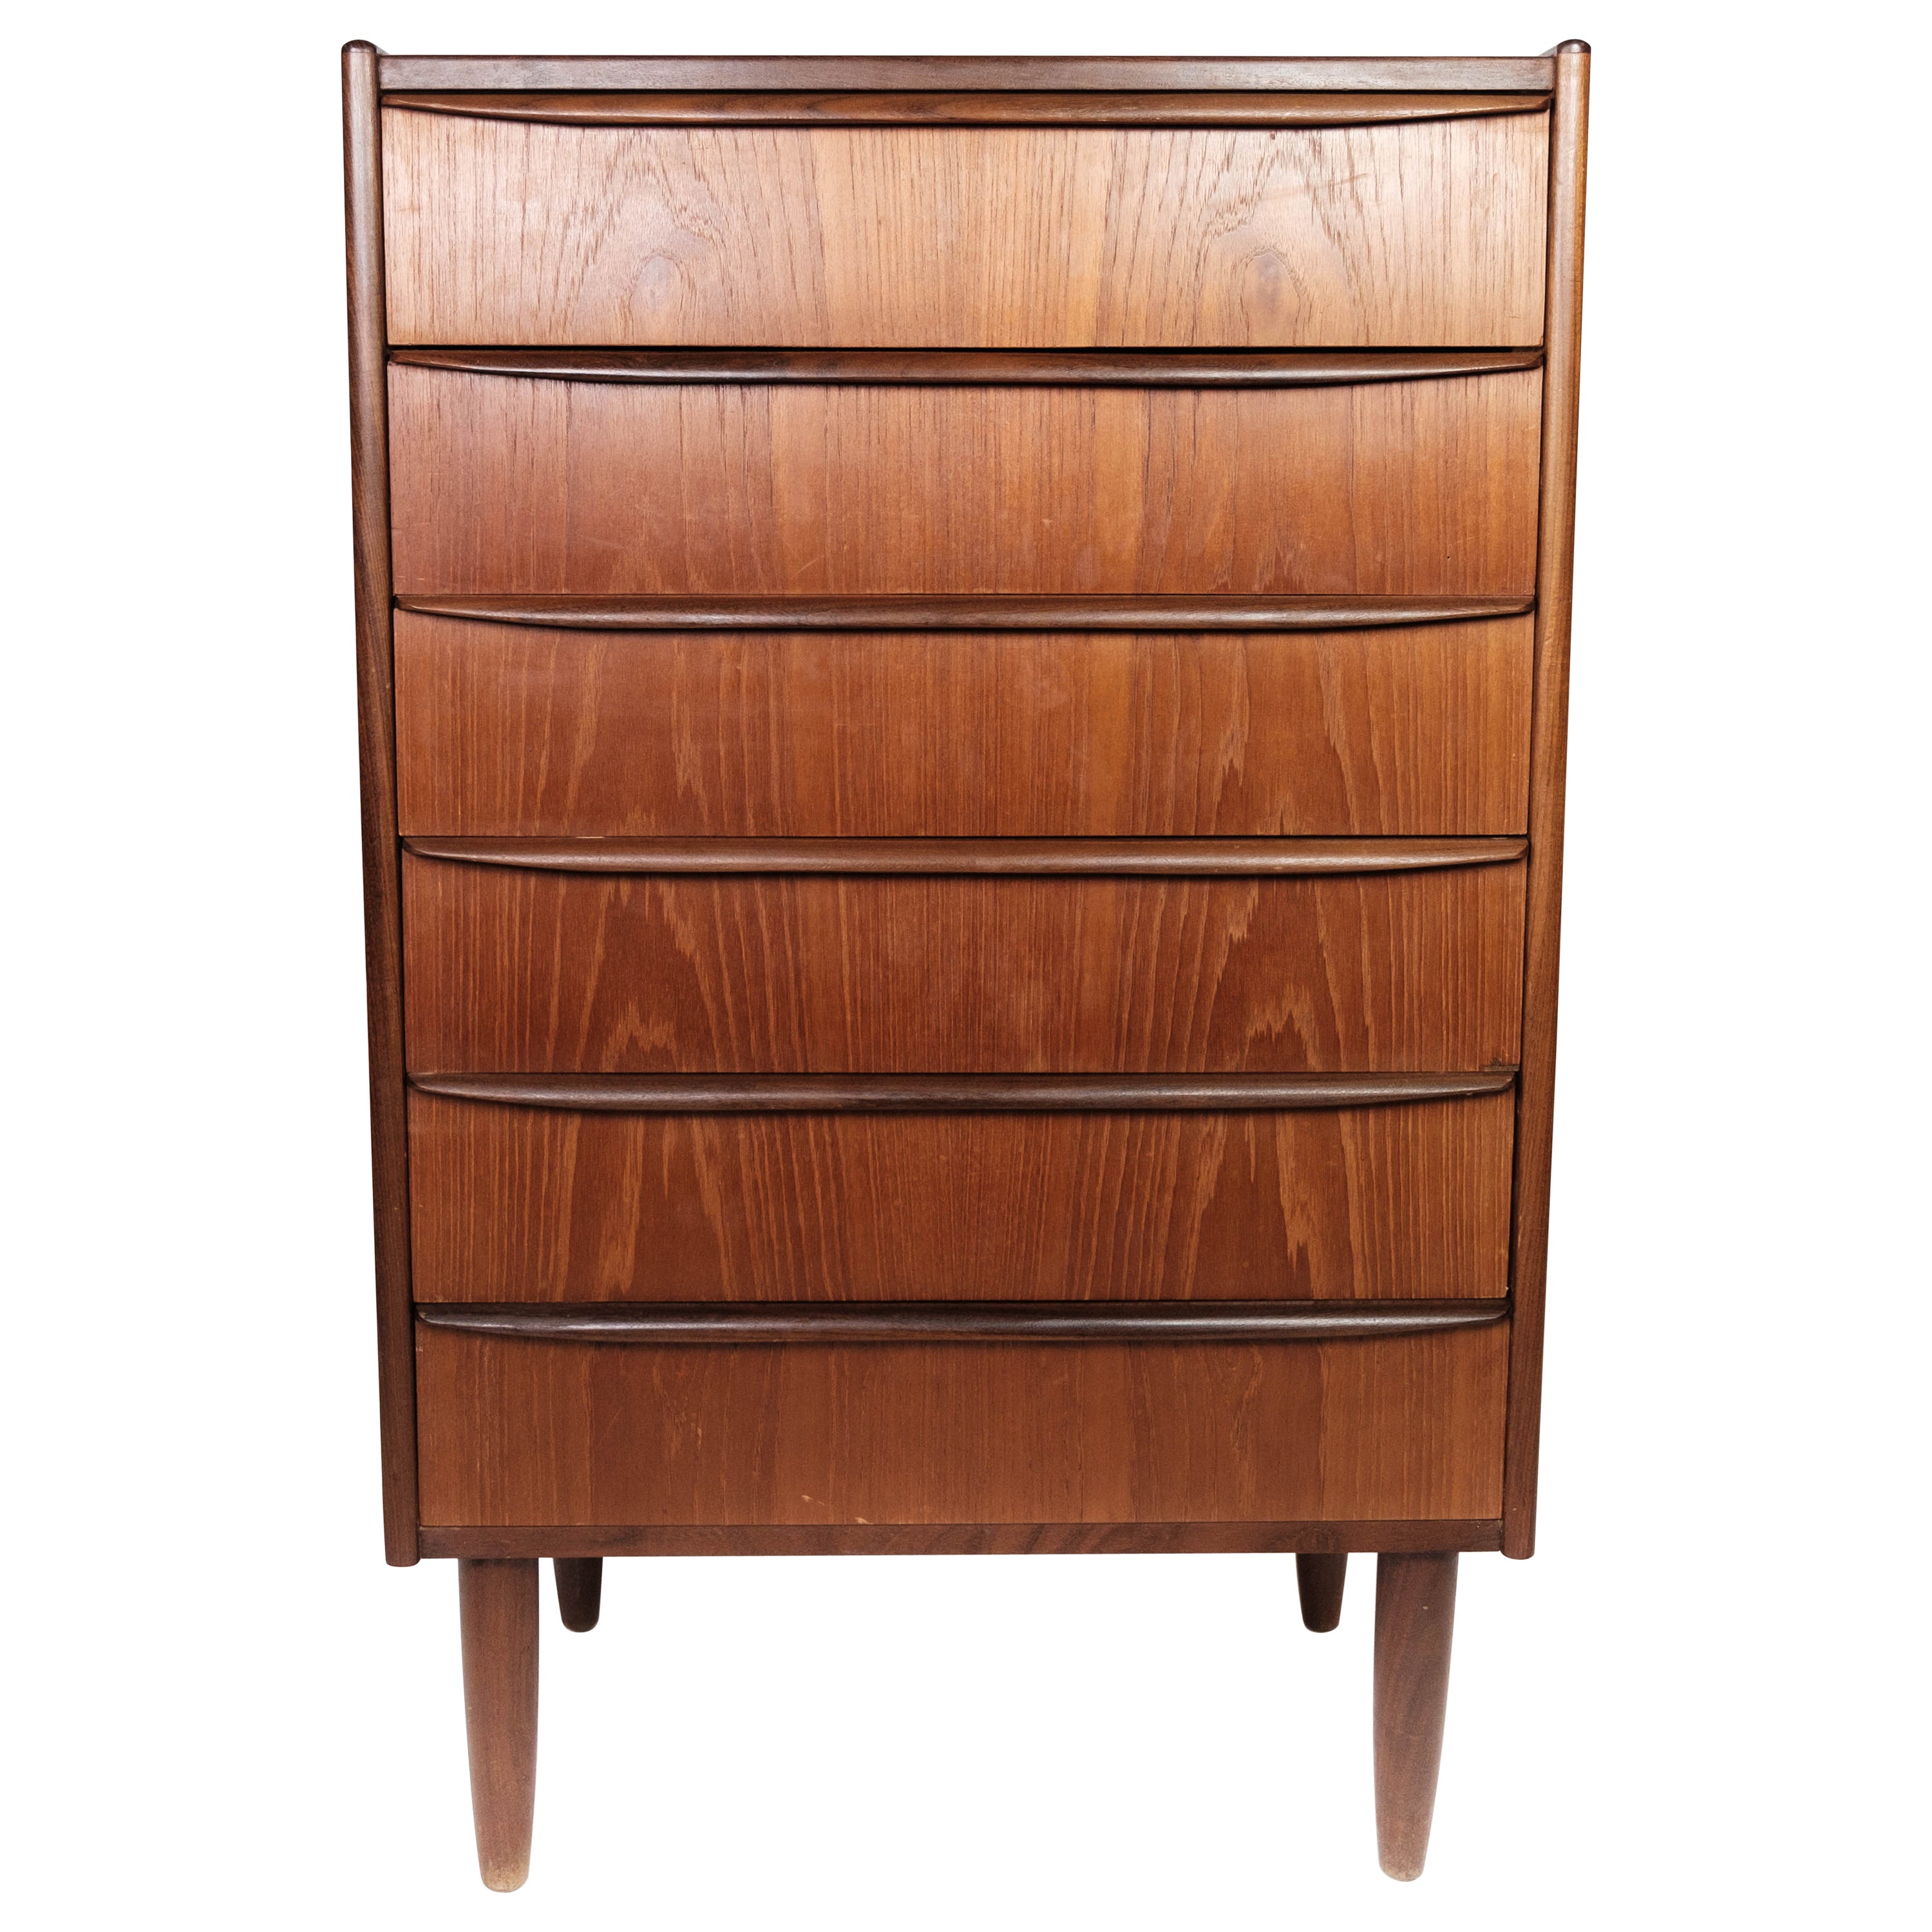 Chest of Drawers in Teak with Six Drawers, of Danish Design from the 1960s